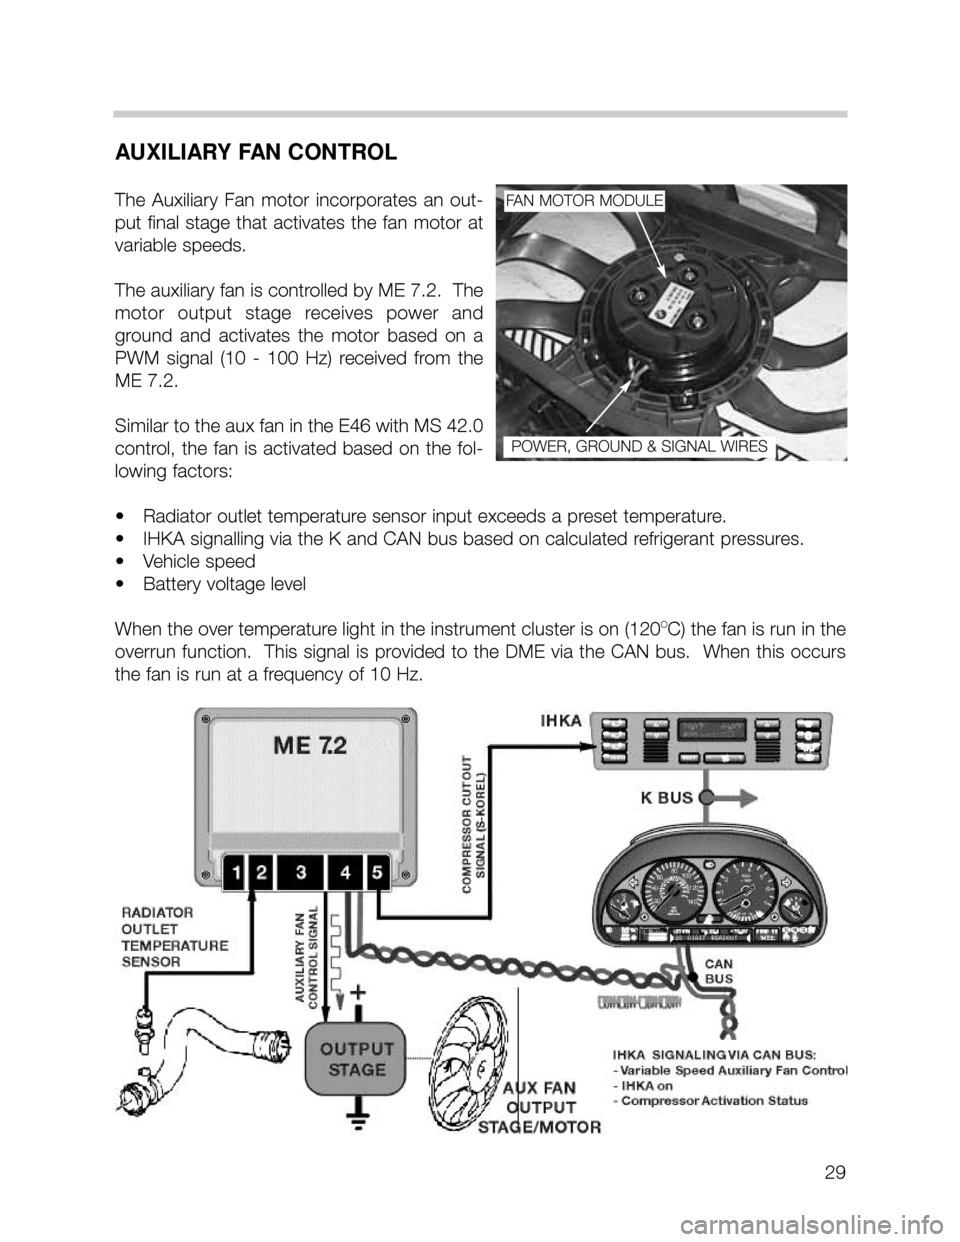 BMW 535i 1999 E39 M62TU Engine Owners Manual 29
AUXILIARY FAN CONTROL
The  Auxiliary  Fan  motor  incorporates  an  out-
put  final  stage  that  activates  the  fan  motor  at
variable speeds.  
The auxiliary fan is controlled by ME 7.2.  The
m